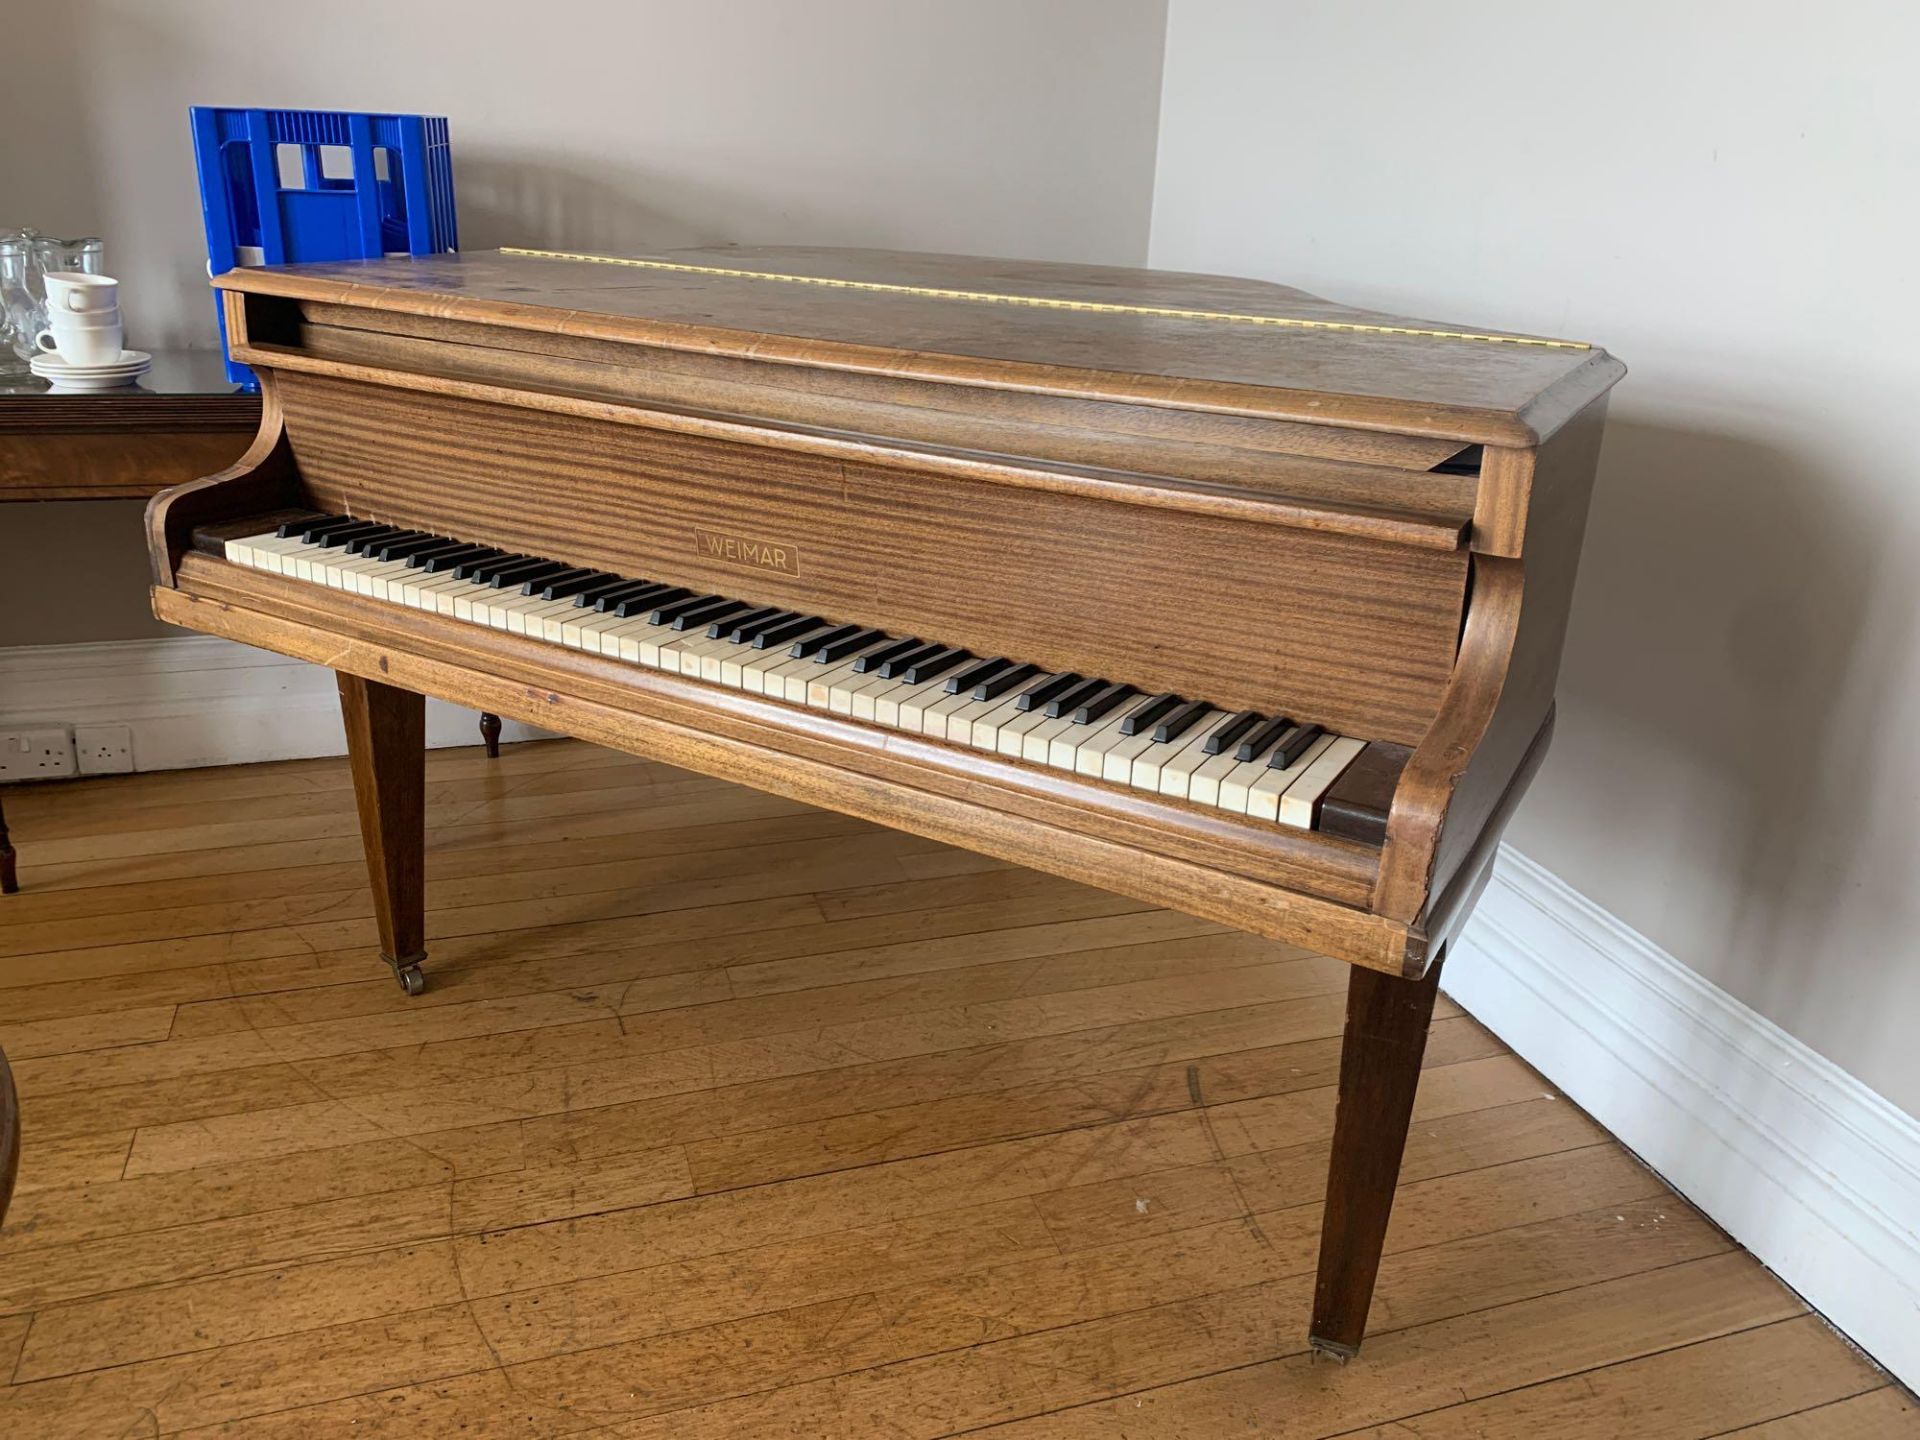 Welmar Grand Piano Reg No 785494 Welmar Was Founded In 1925 Welmar Was Owned By Whelpdale